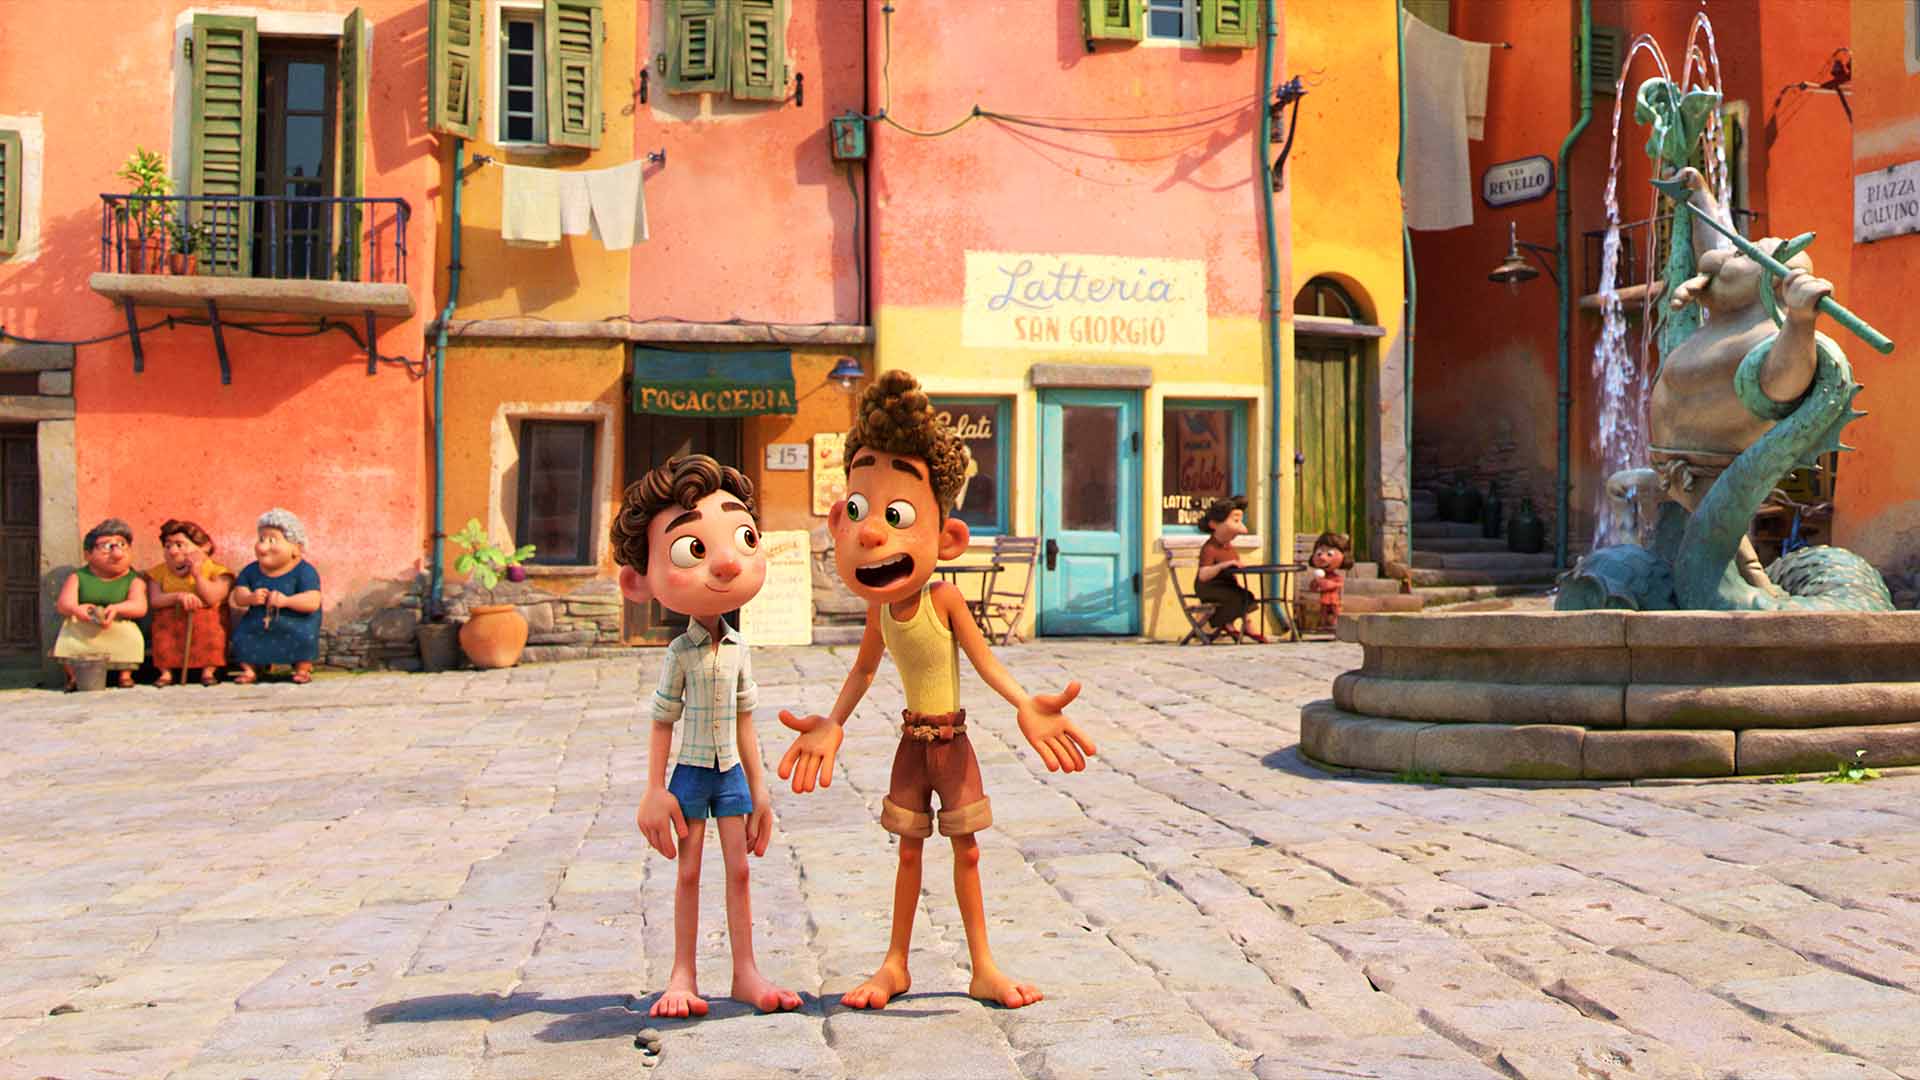 The First Trailer for Pixar's New Movie 'Luca' Will Have You Yearning for an Italian Holiday